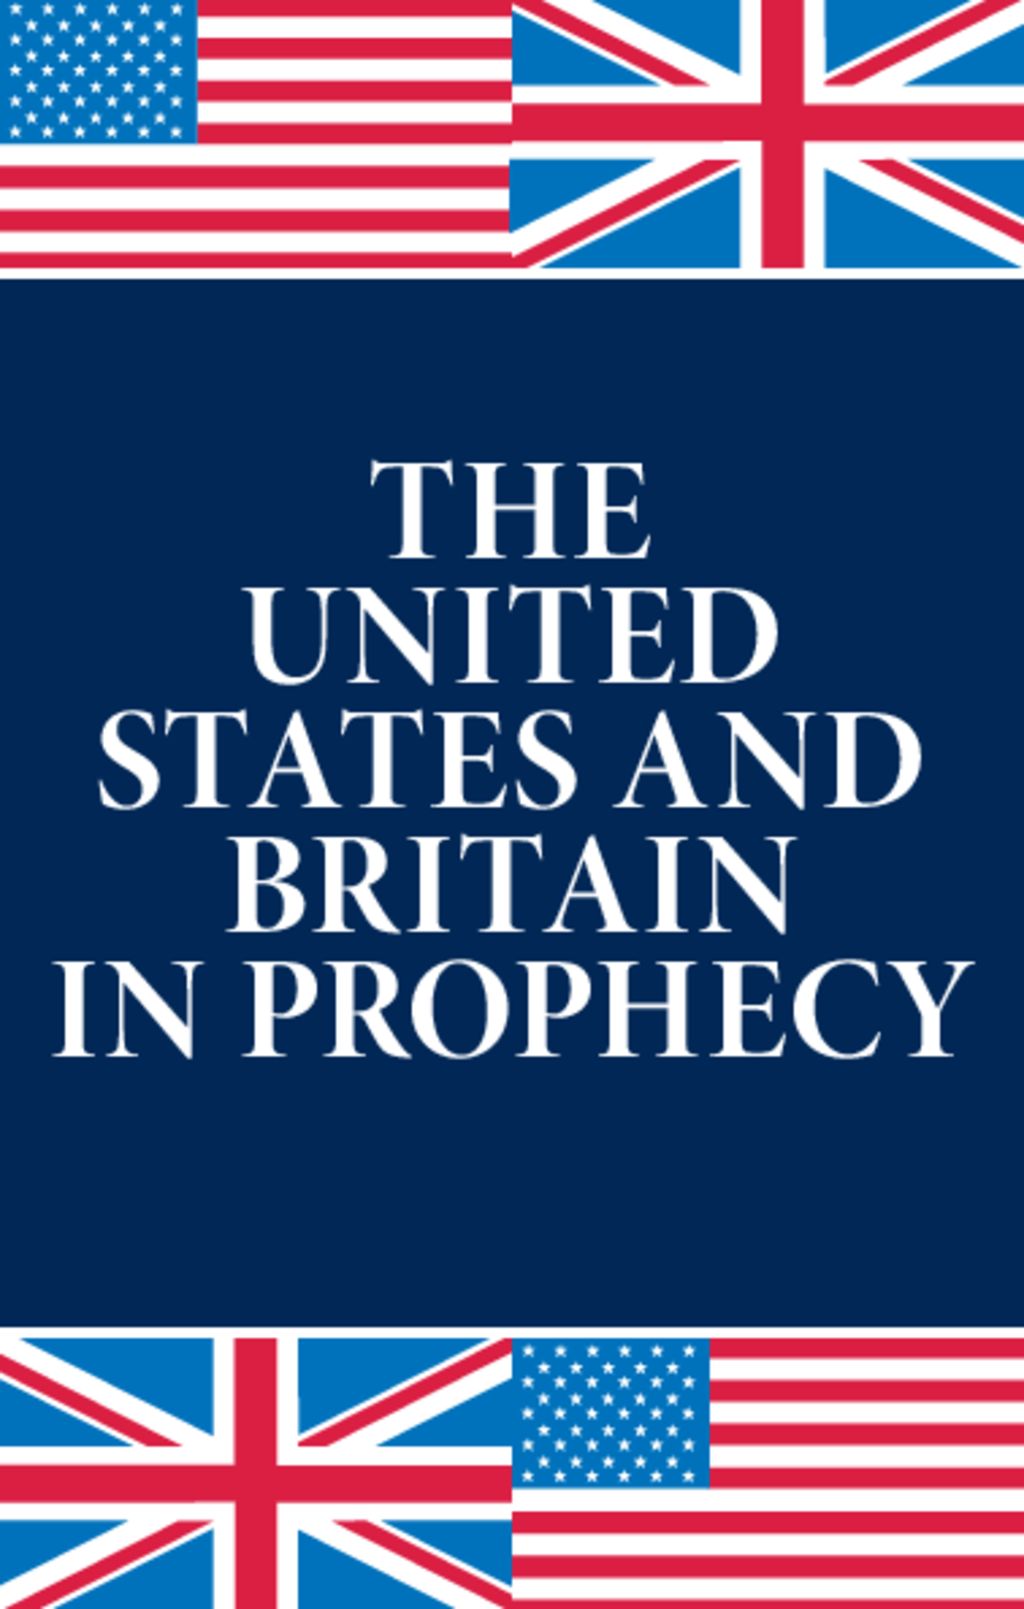 The United States and Britain in Prophecy | theTrumpet.com